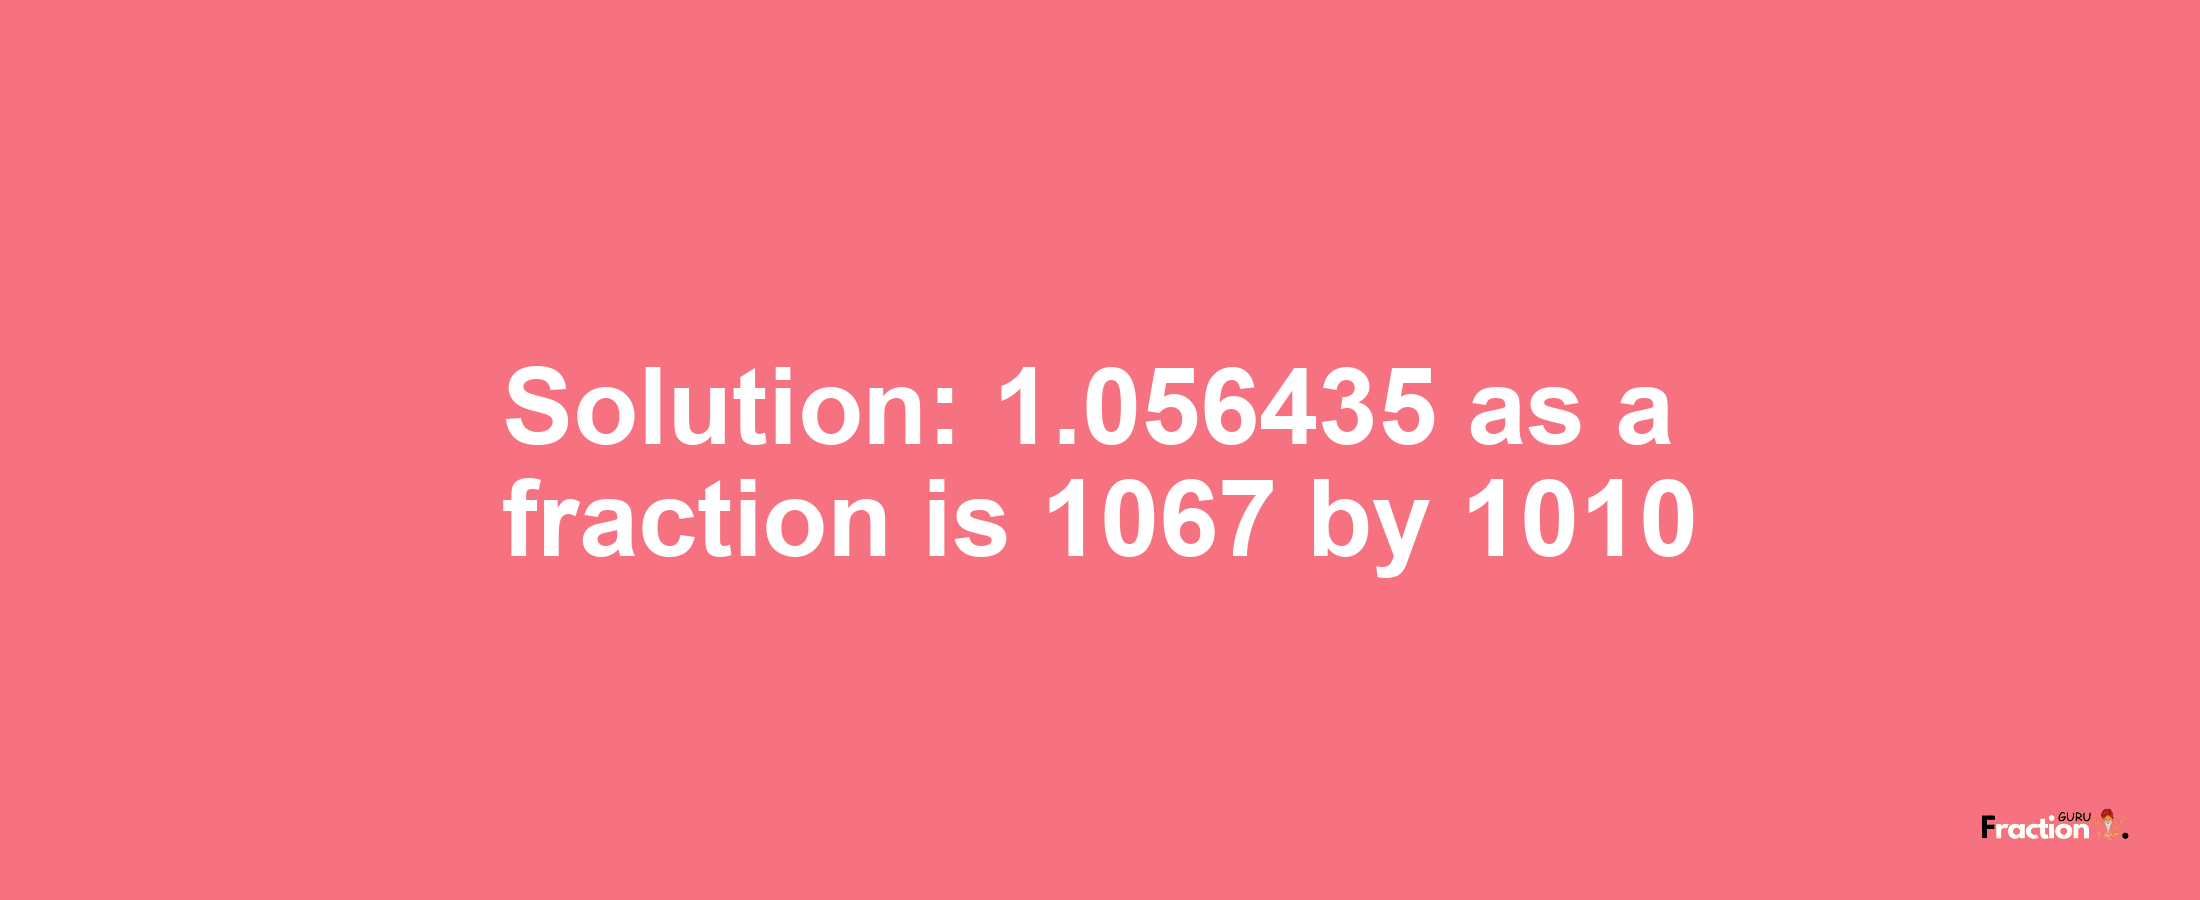 Solution:1.056435 as a fraction is 1067/1010